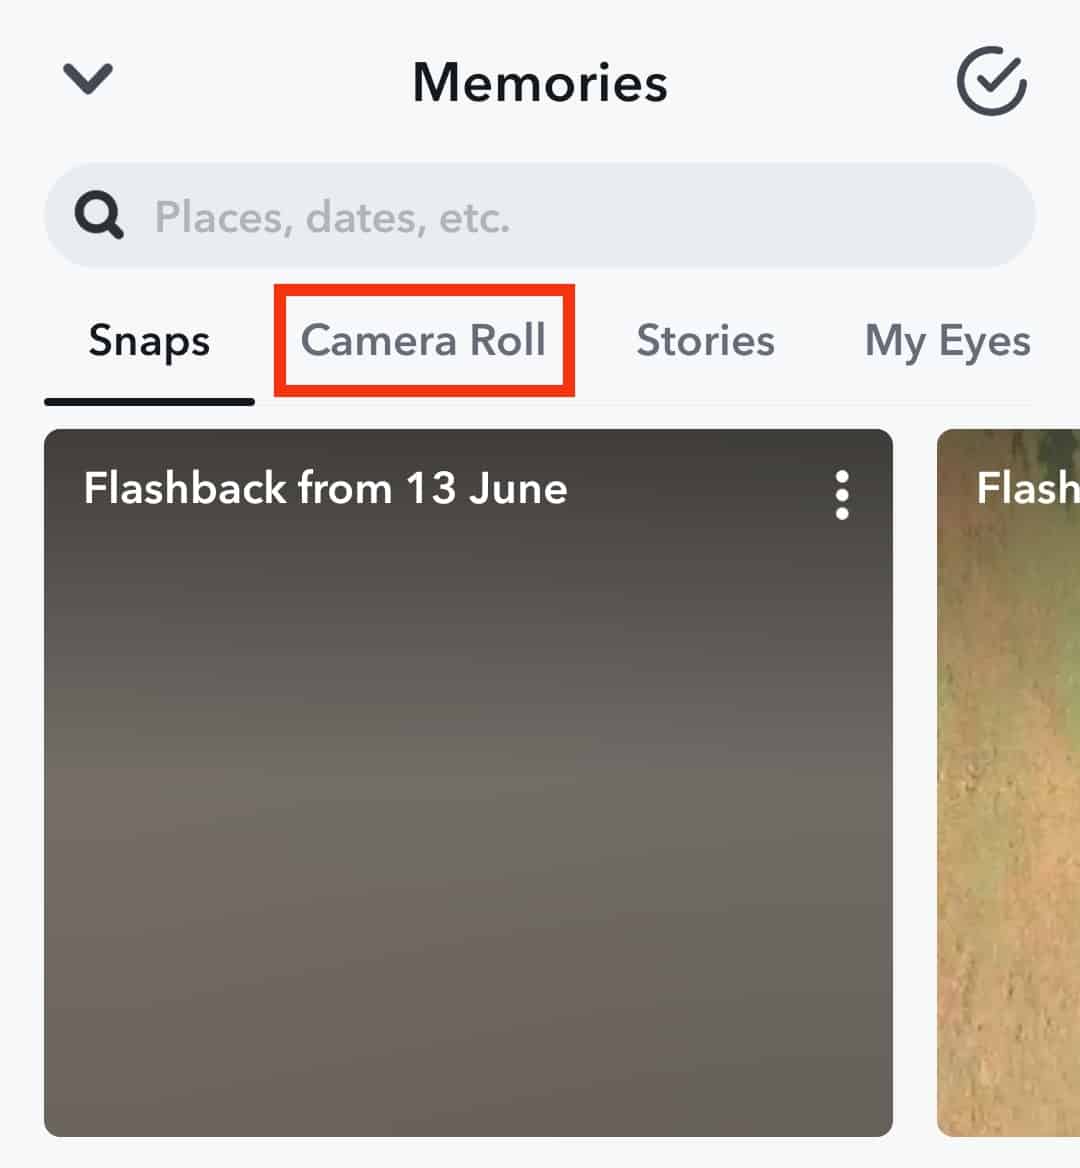 Navigate To The Camera Roll Tab